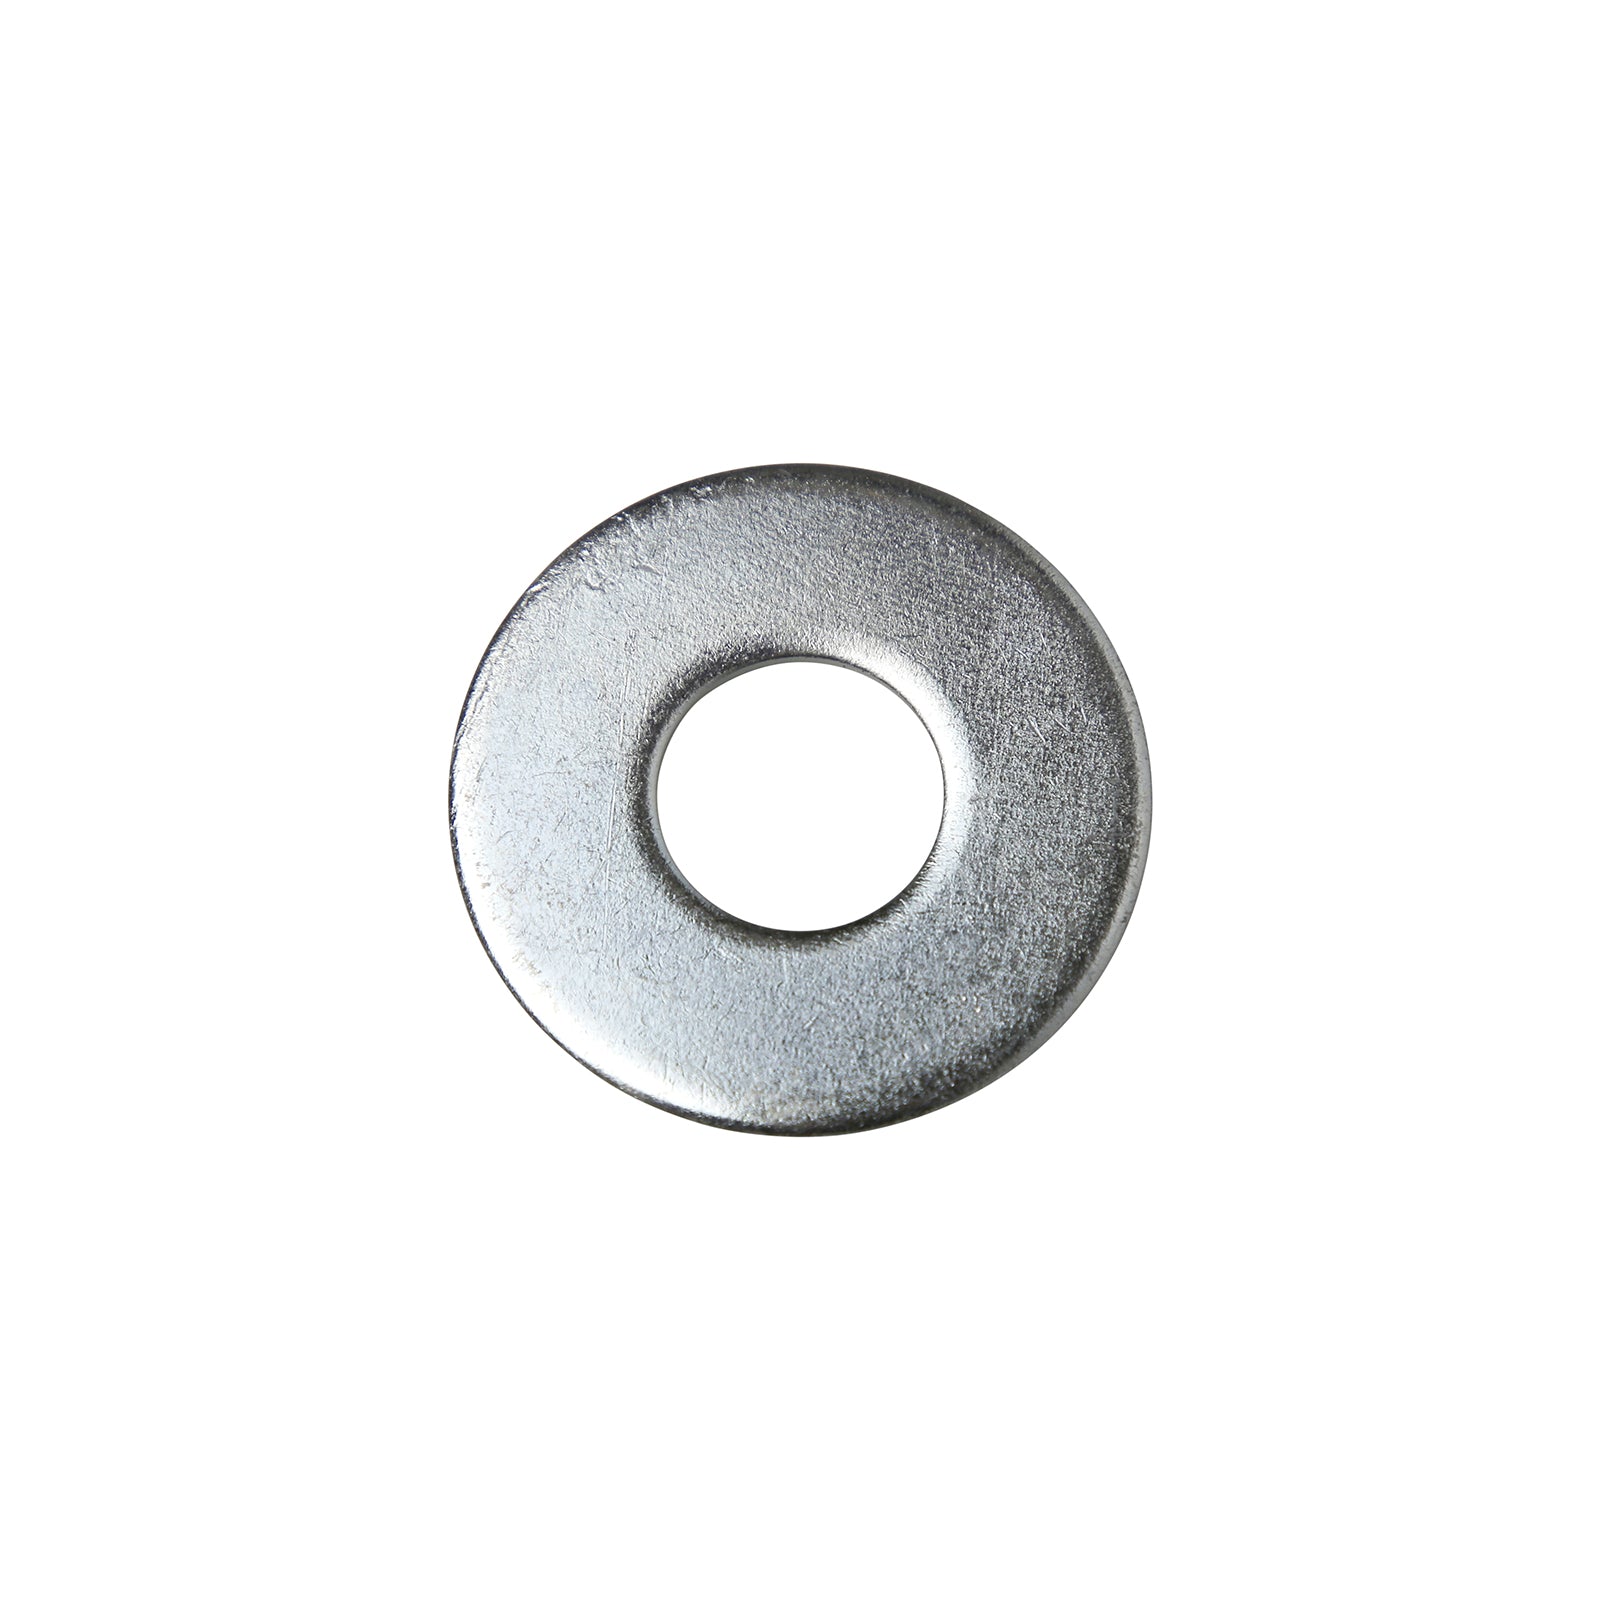 3/4" Conquest USS Flat Washer - Zinc Plated